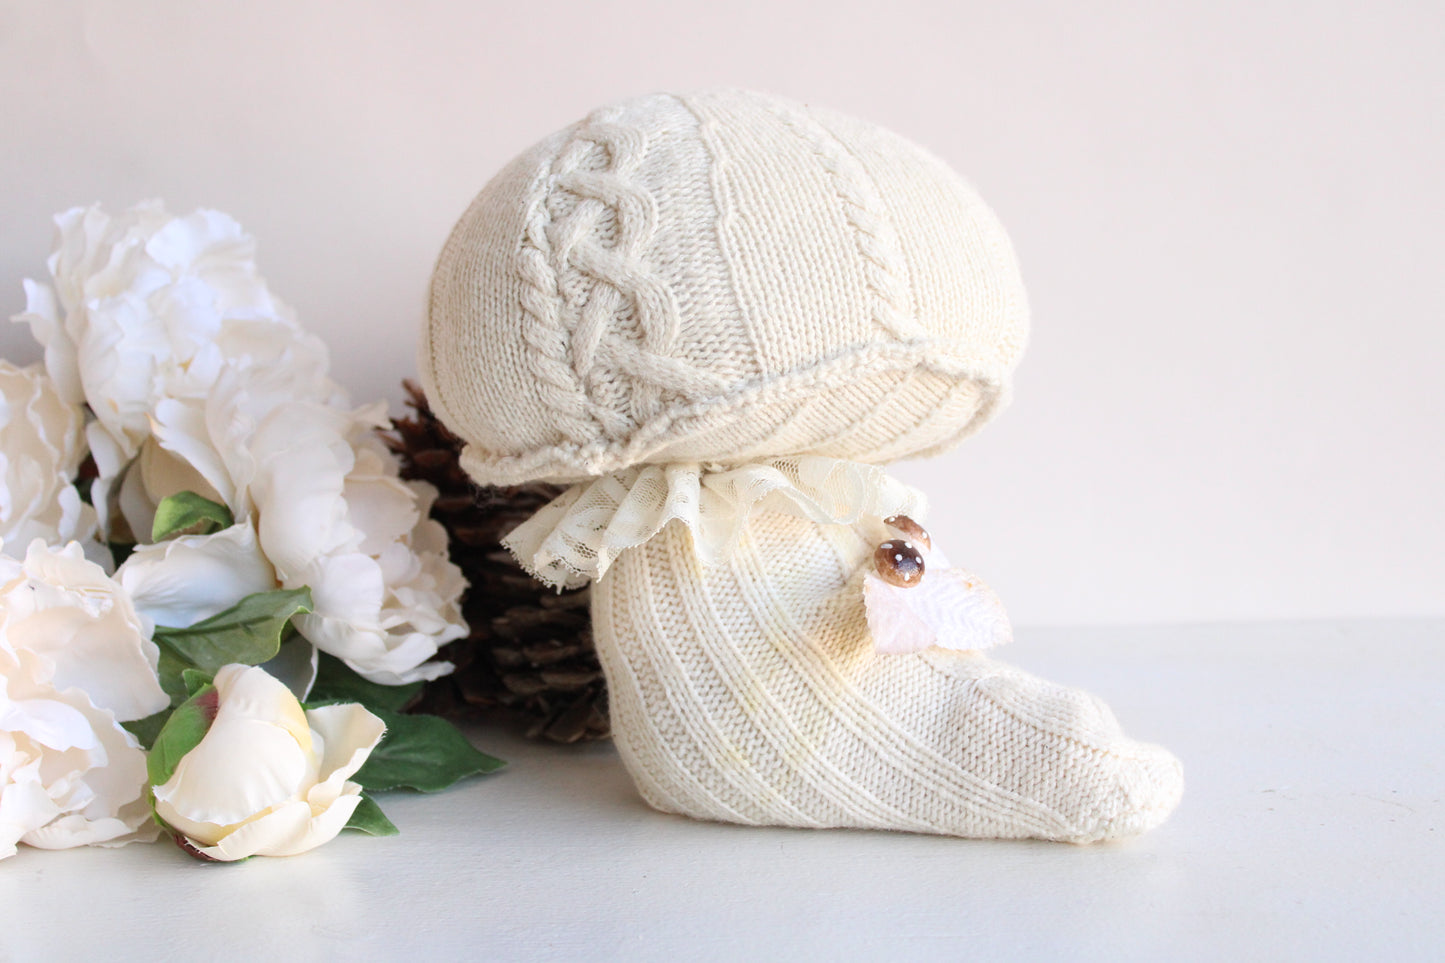 "Moon Forest" Handcrafted Sweater Toadstool with Vintage Lace, Velvet Leaves and Toadstools